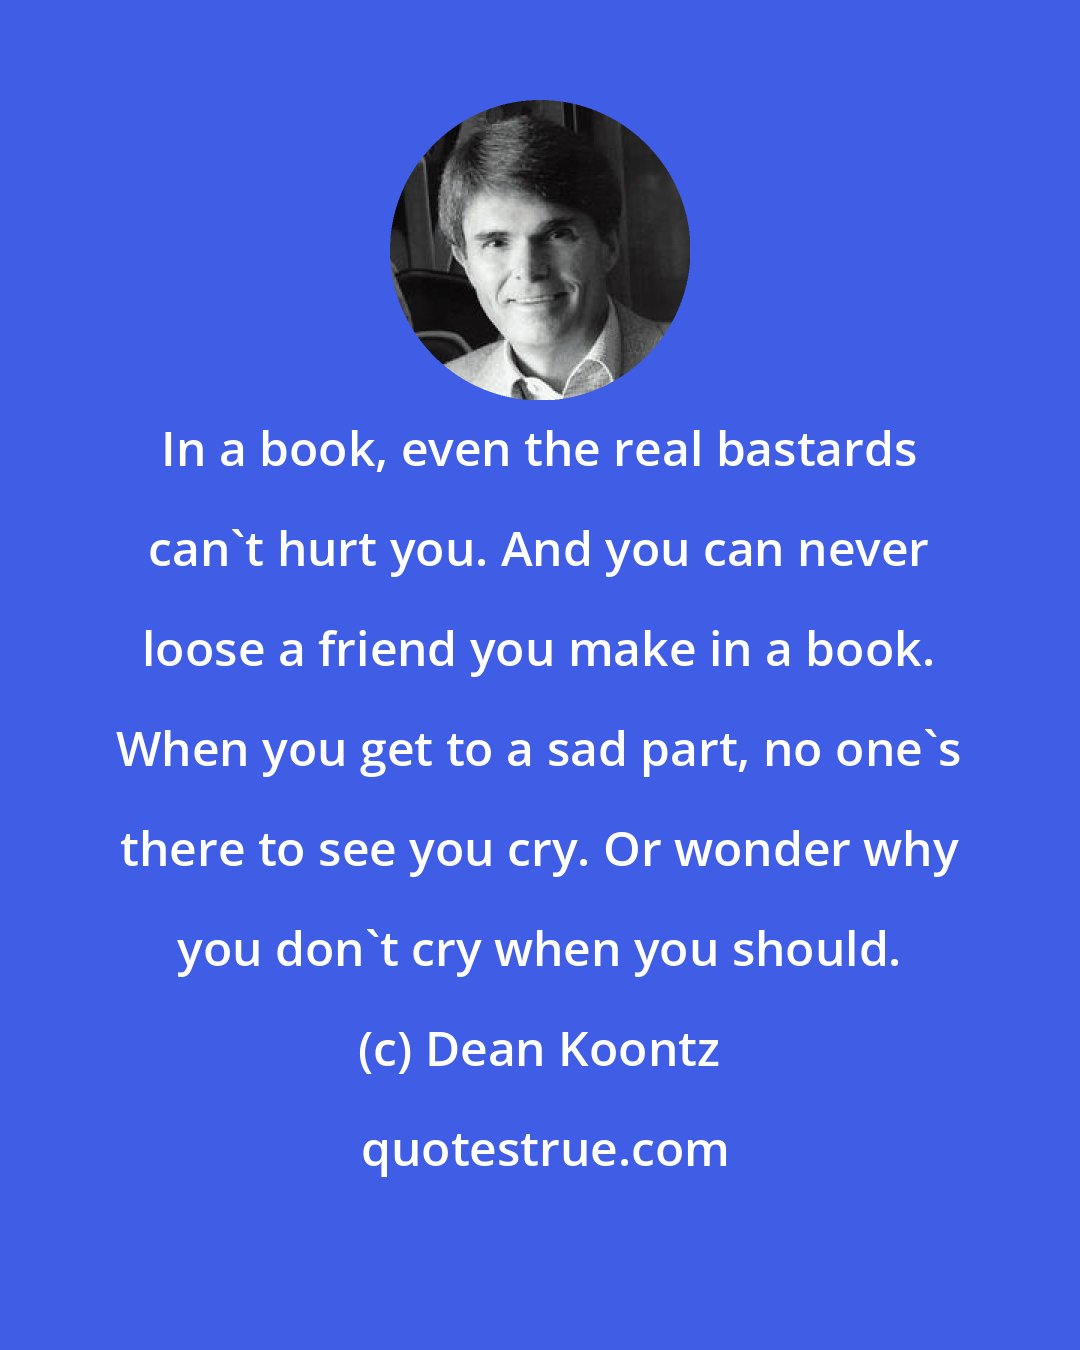 Dean Koontz: In a book, even the real bastards can't hurt you. And you can never loose a friend you make in a book. When you get to a sad part, no one's there to see you cry. Or wonder why you don't cry when you should.